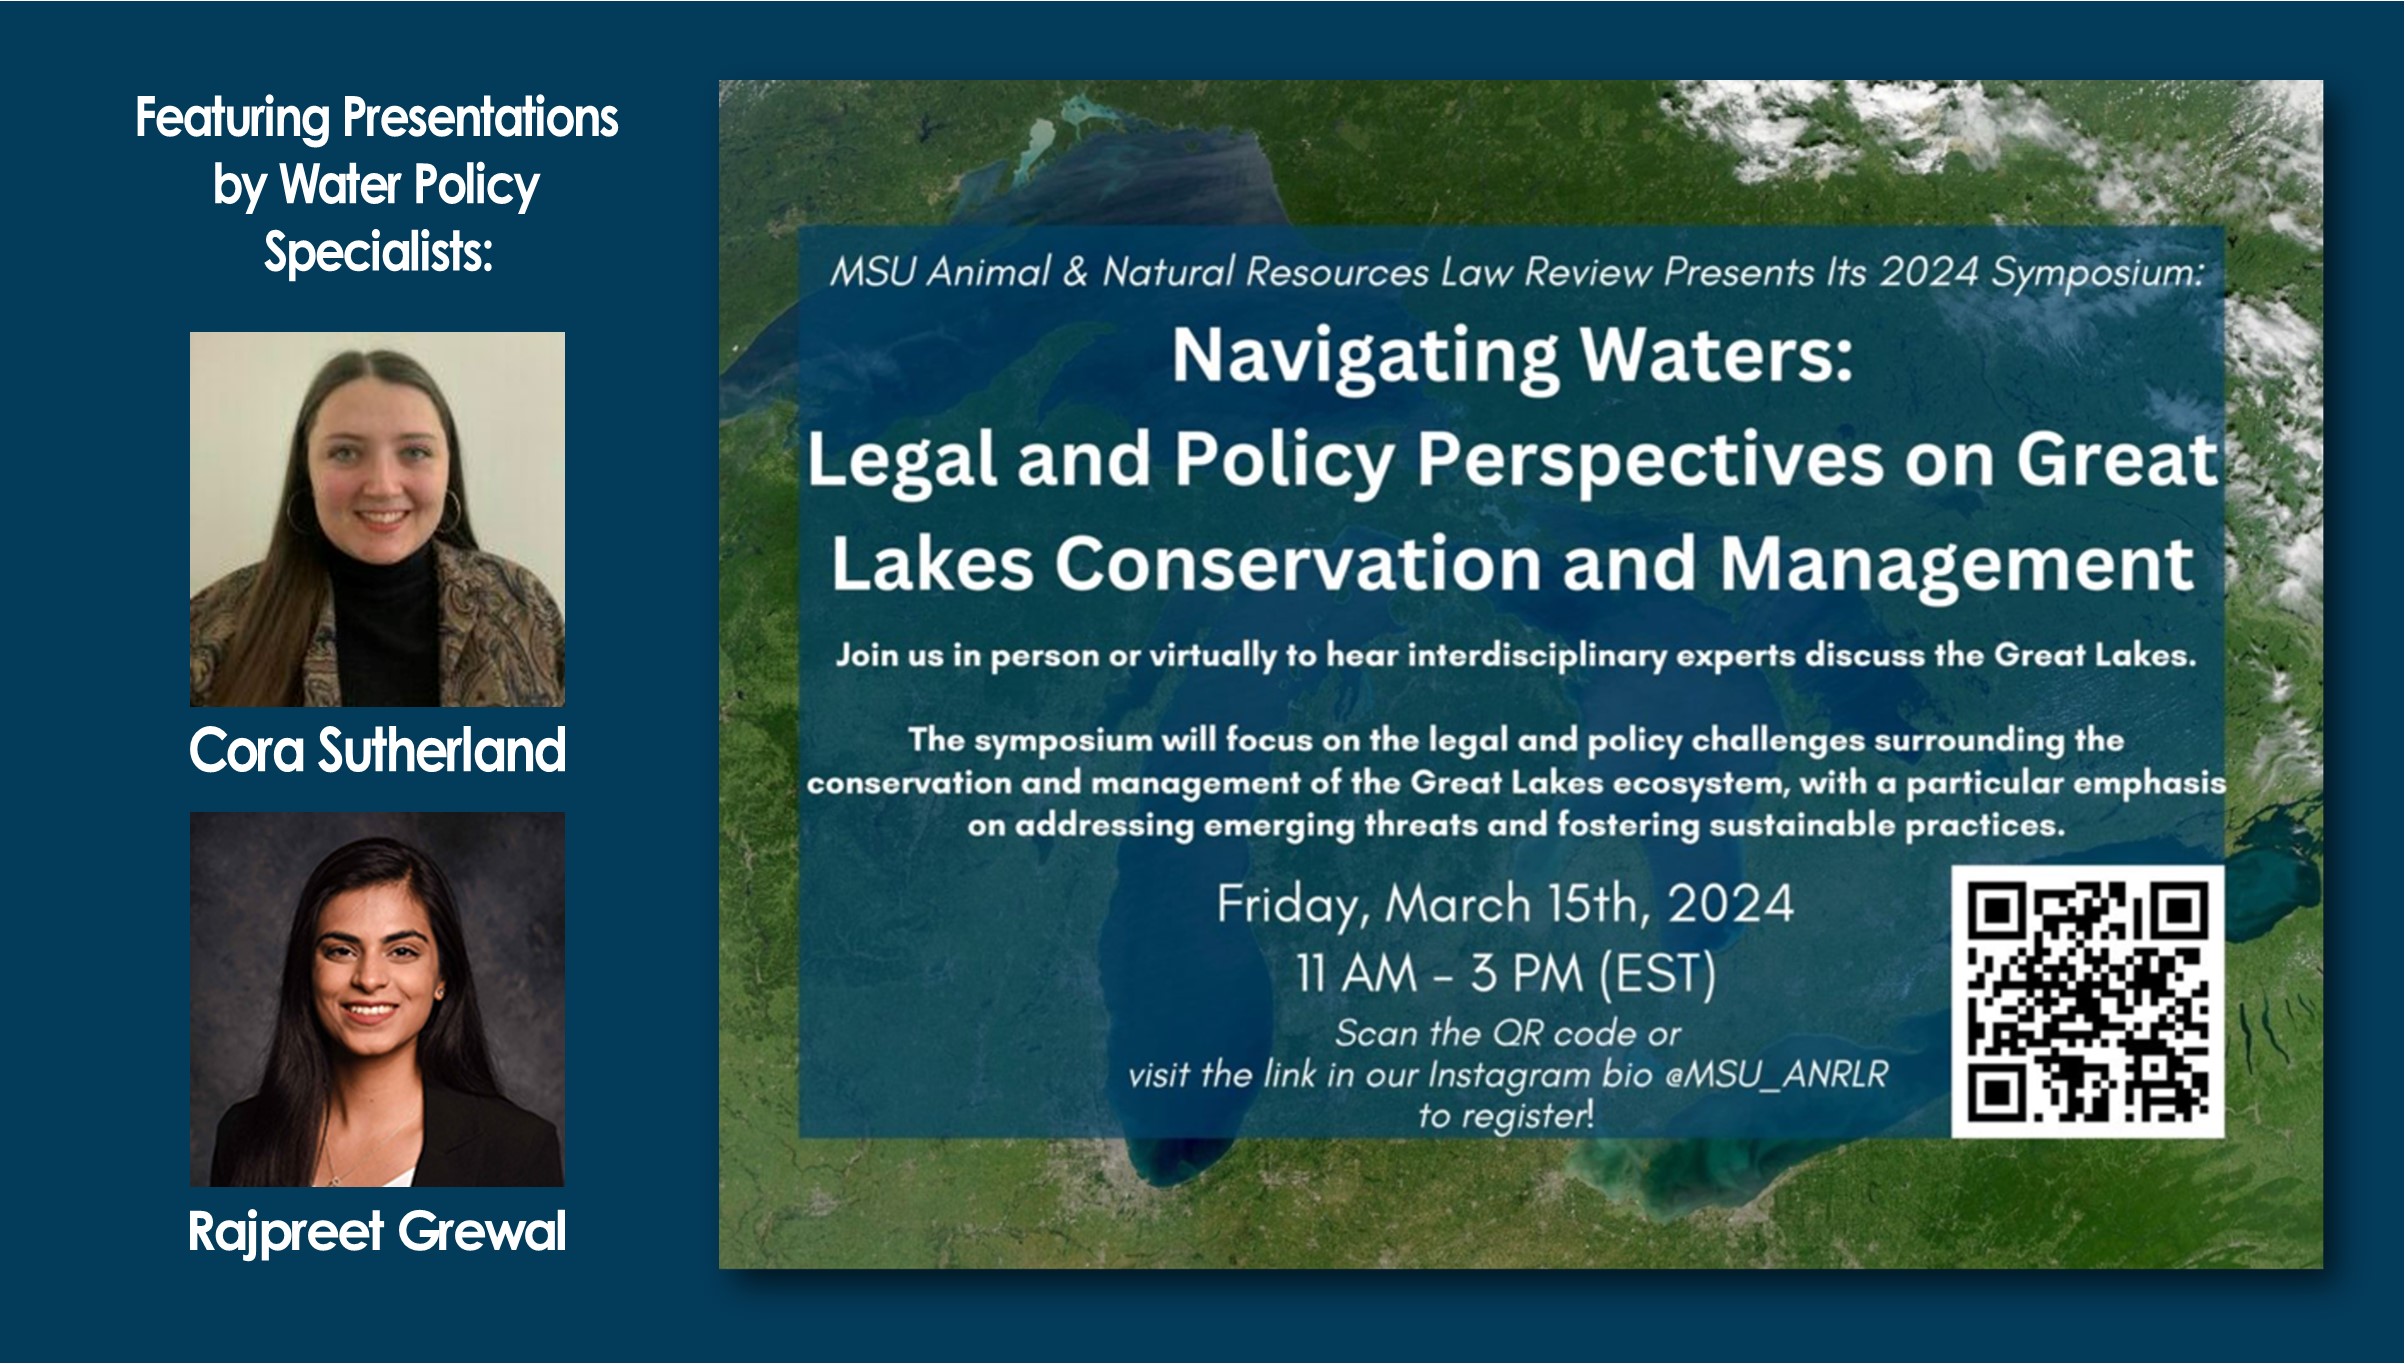 Water Policy Specialists Rajpreet Grewal and Cora Sutherland Presenting at the Michigan State University Animal & Natural Resources Law Review Symposium on March 15th, 2024